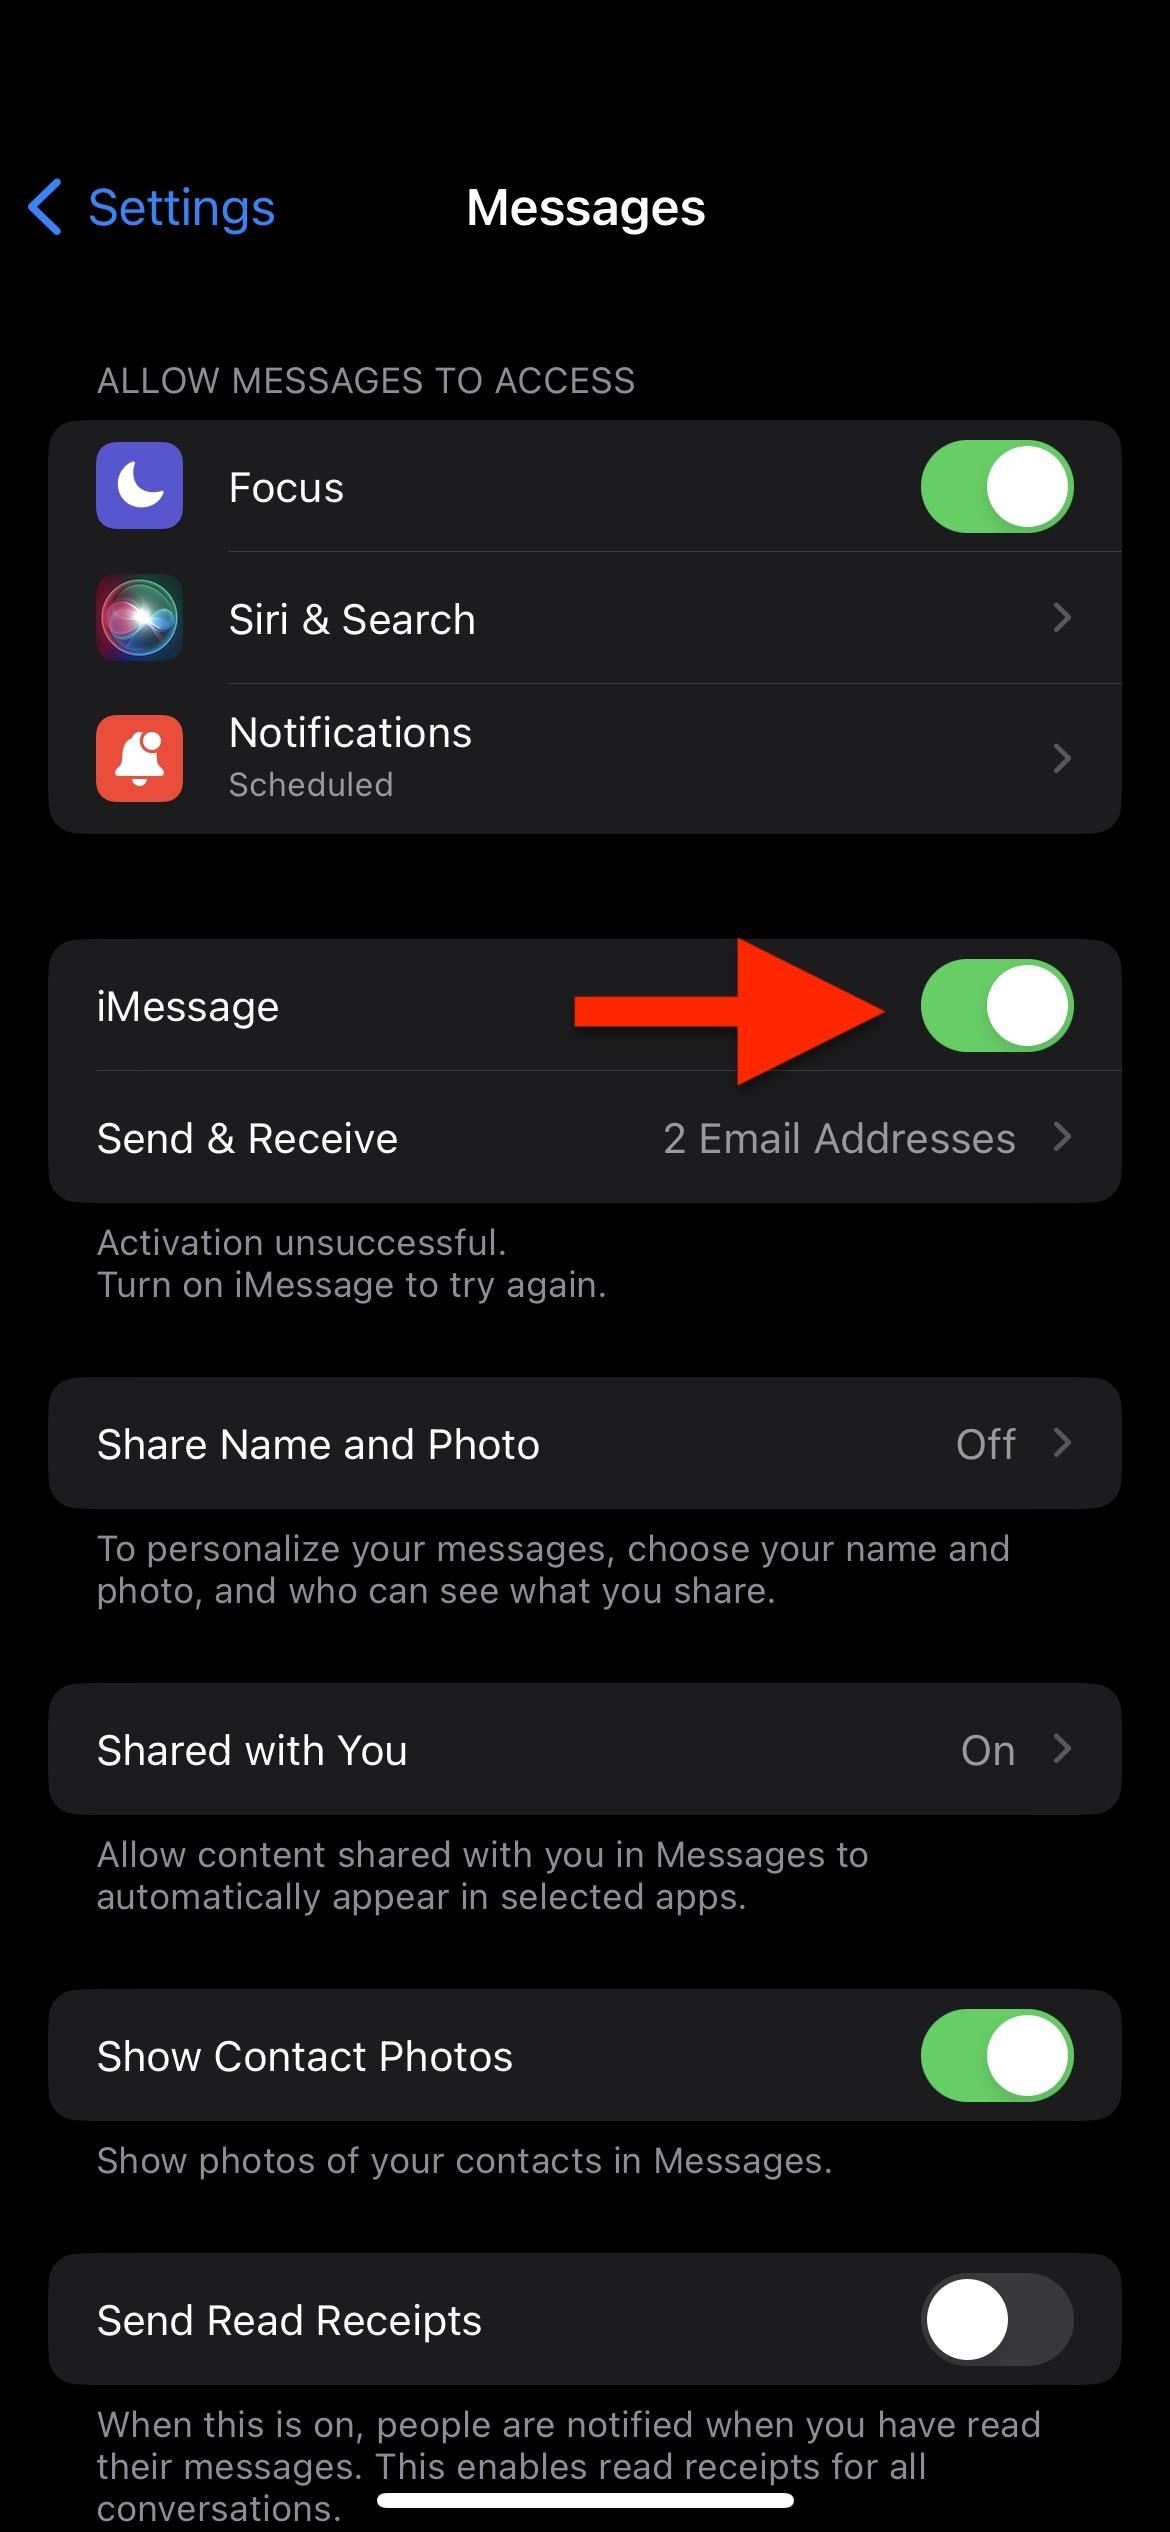 How to Stop Other iMessage Users From Editing or Resuming Messages They Send You